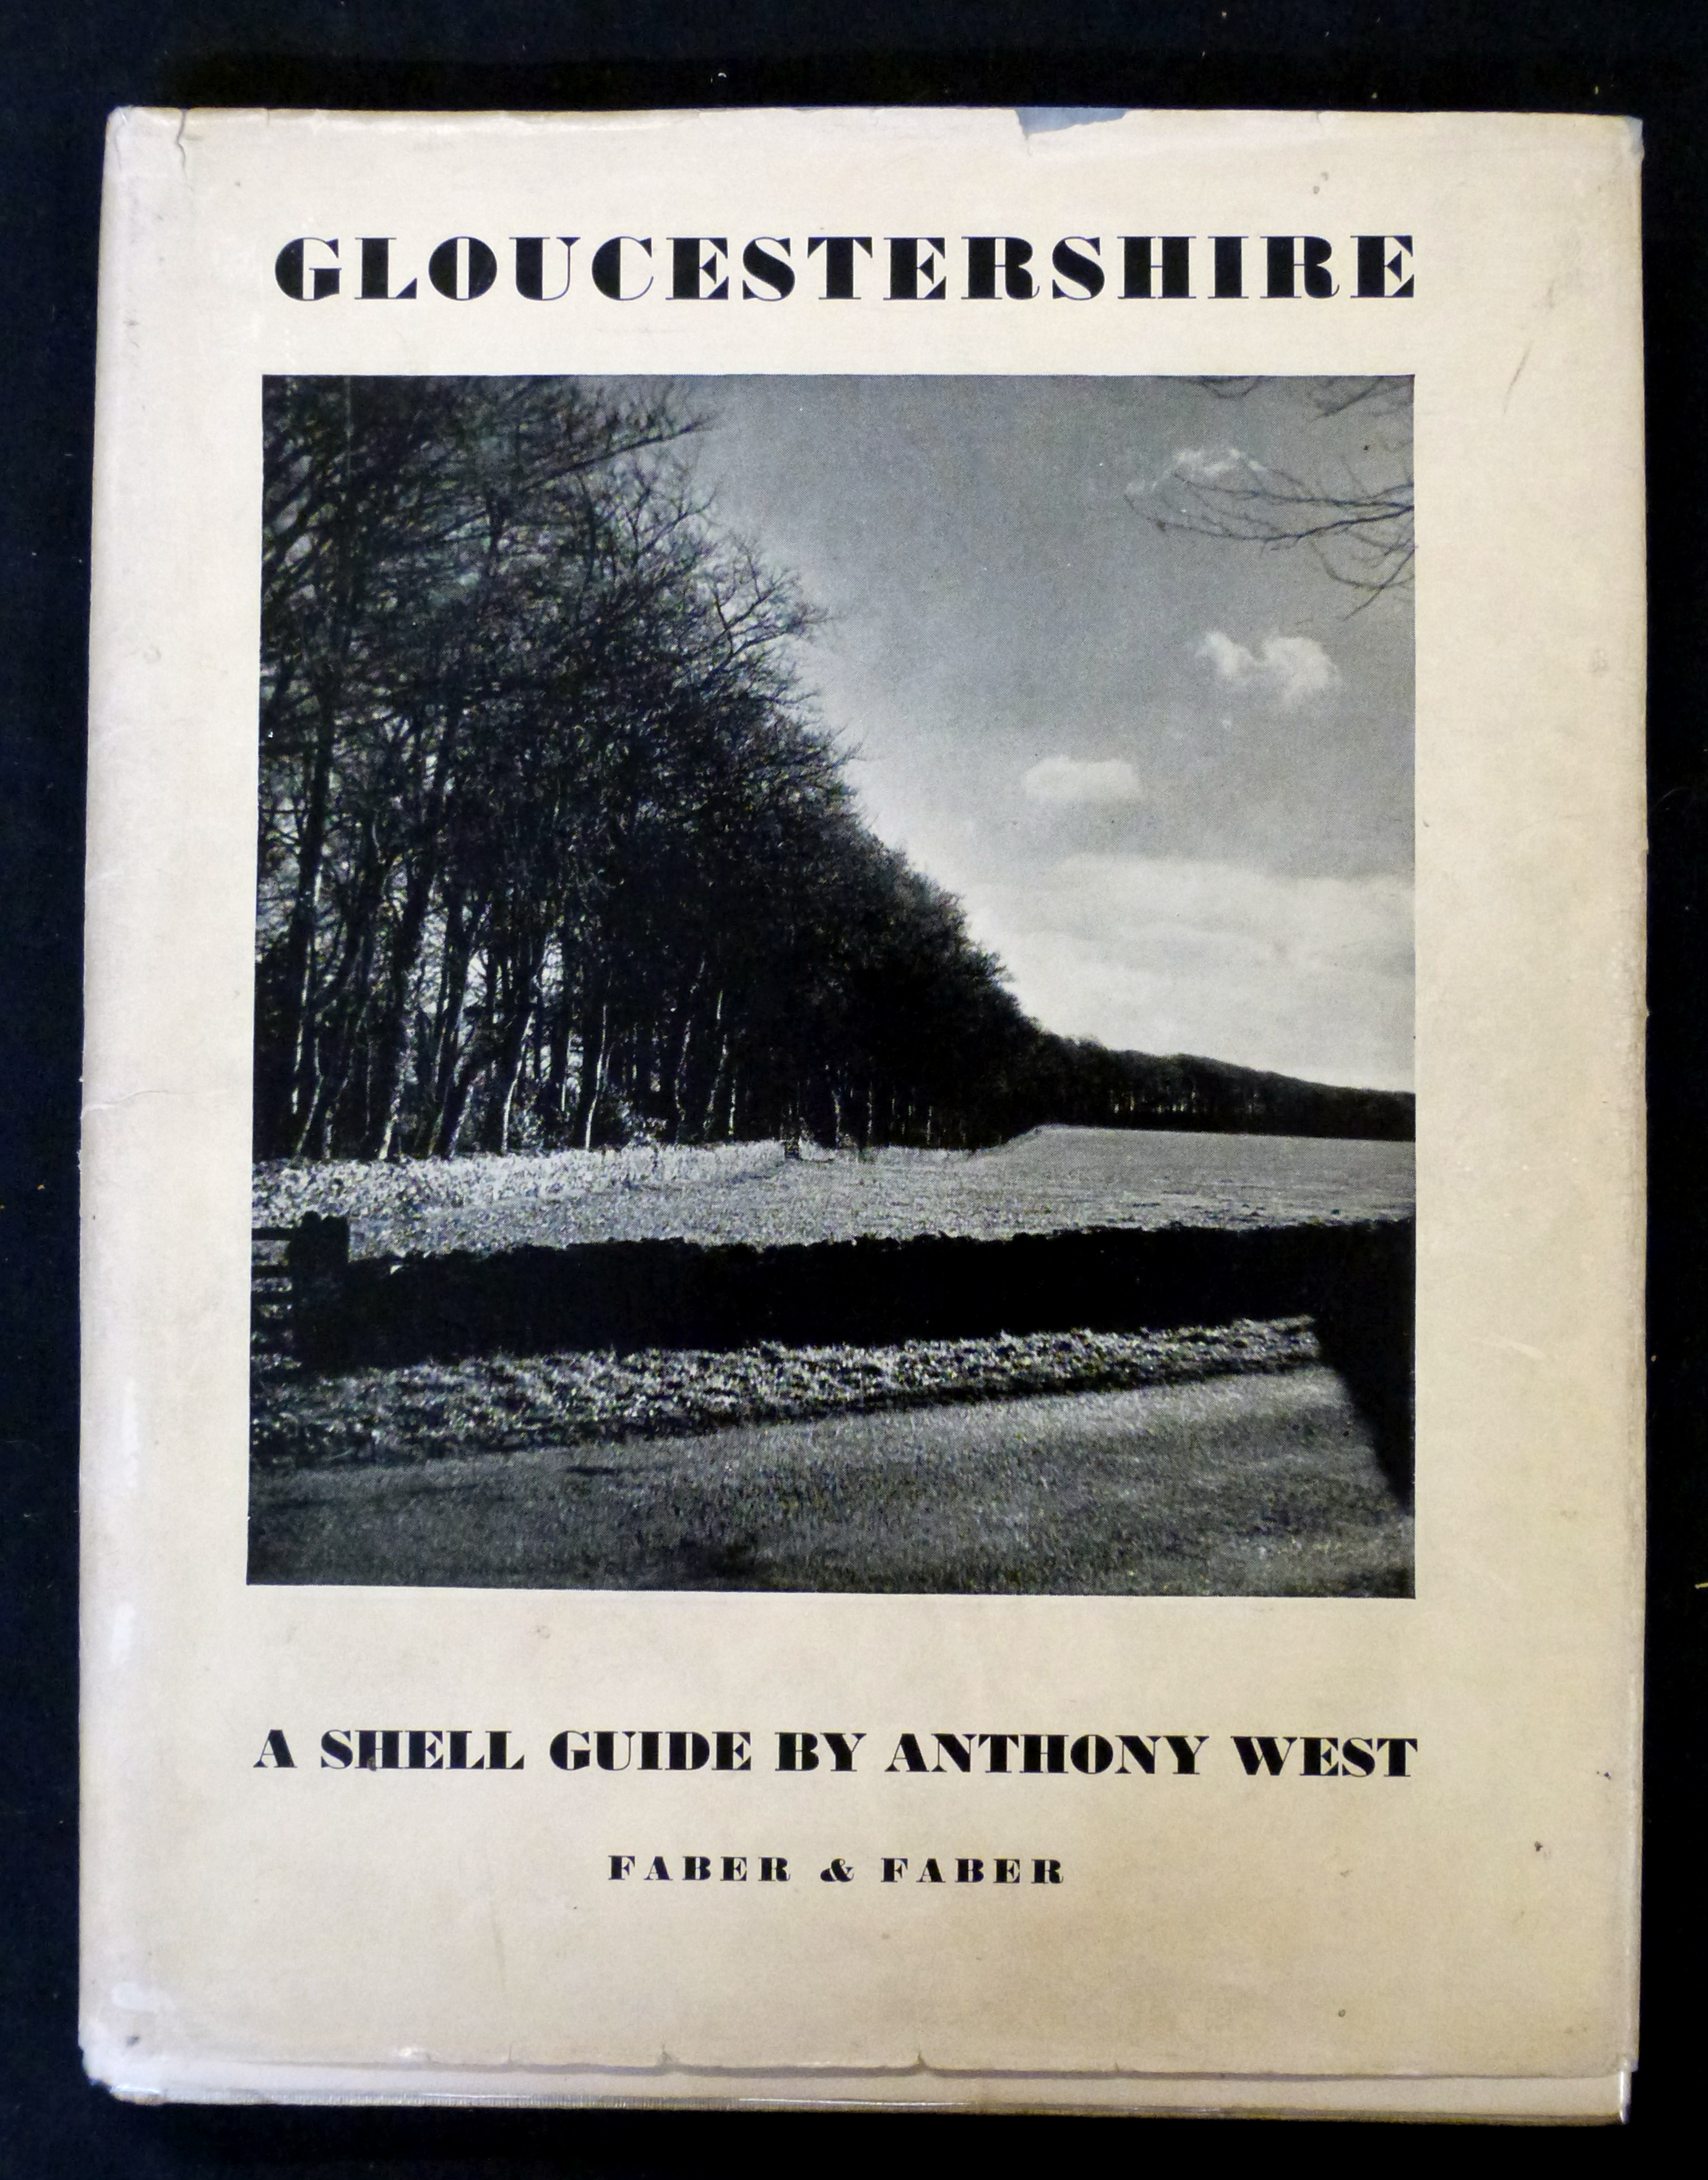 ANTHONY WEST: GLOUCESTERSHIRE, A SHELL GUIDE, London, Faber & Faber, 1939, 1st edition,